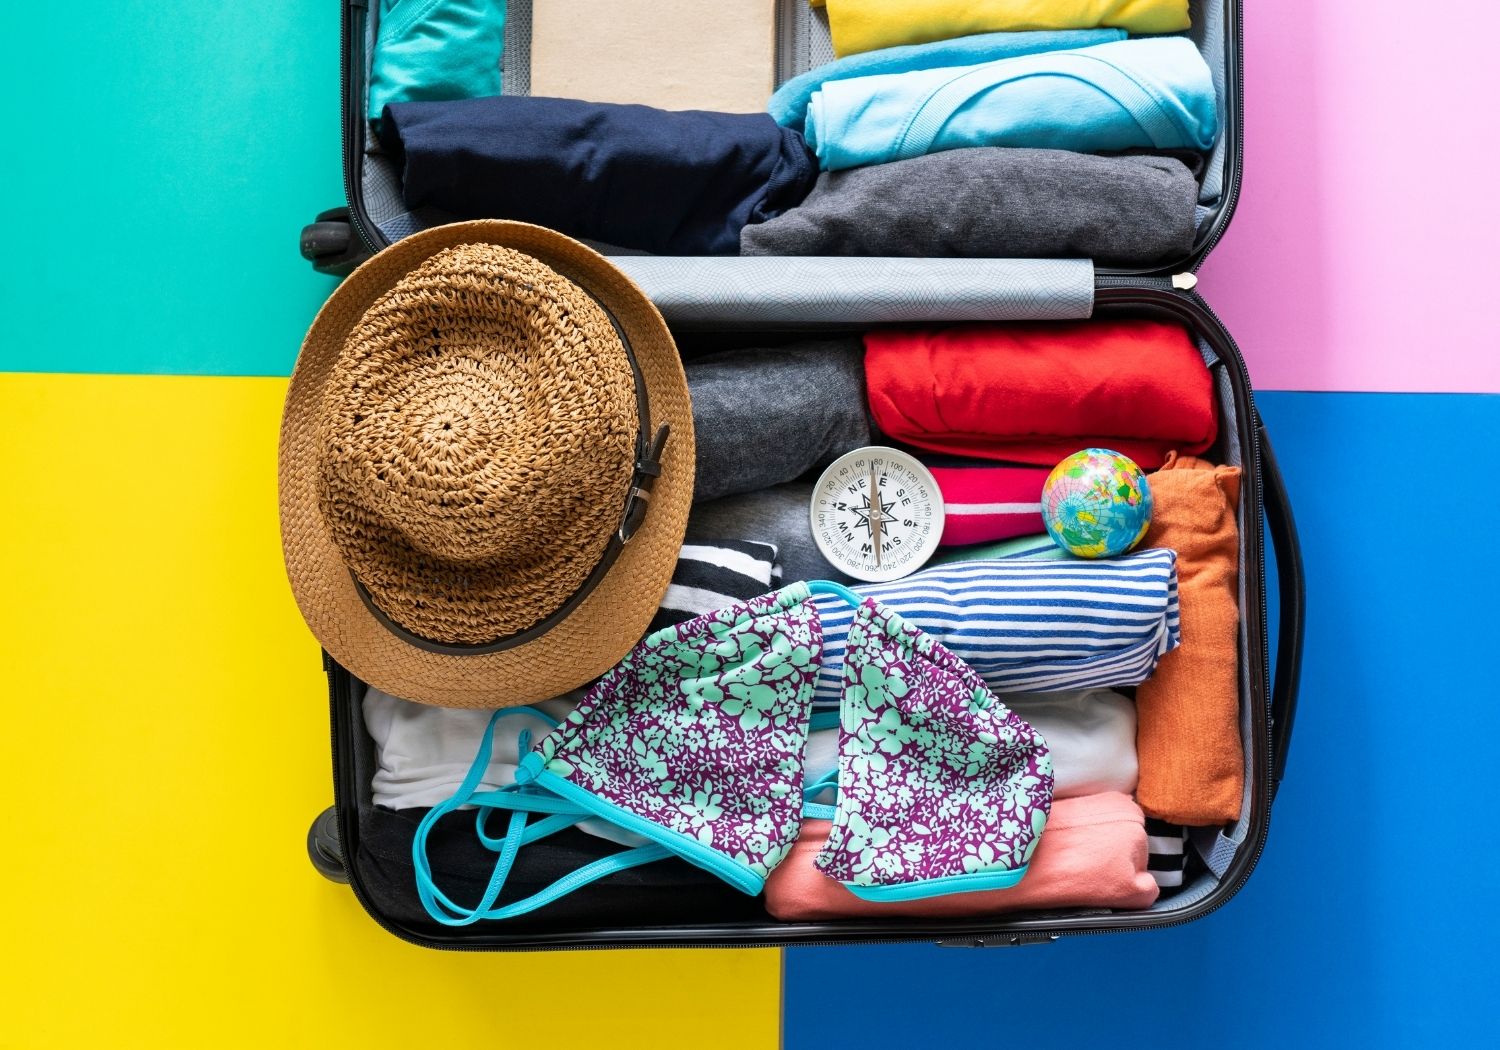 How to fit more things in your carry - on luggage - hacks for